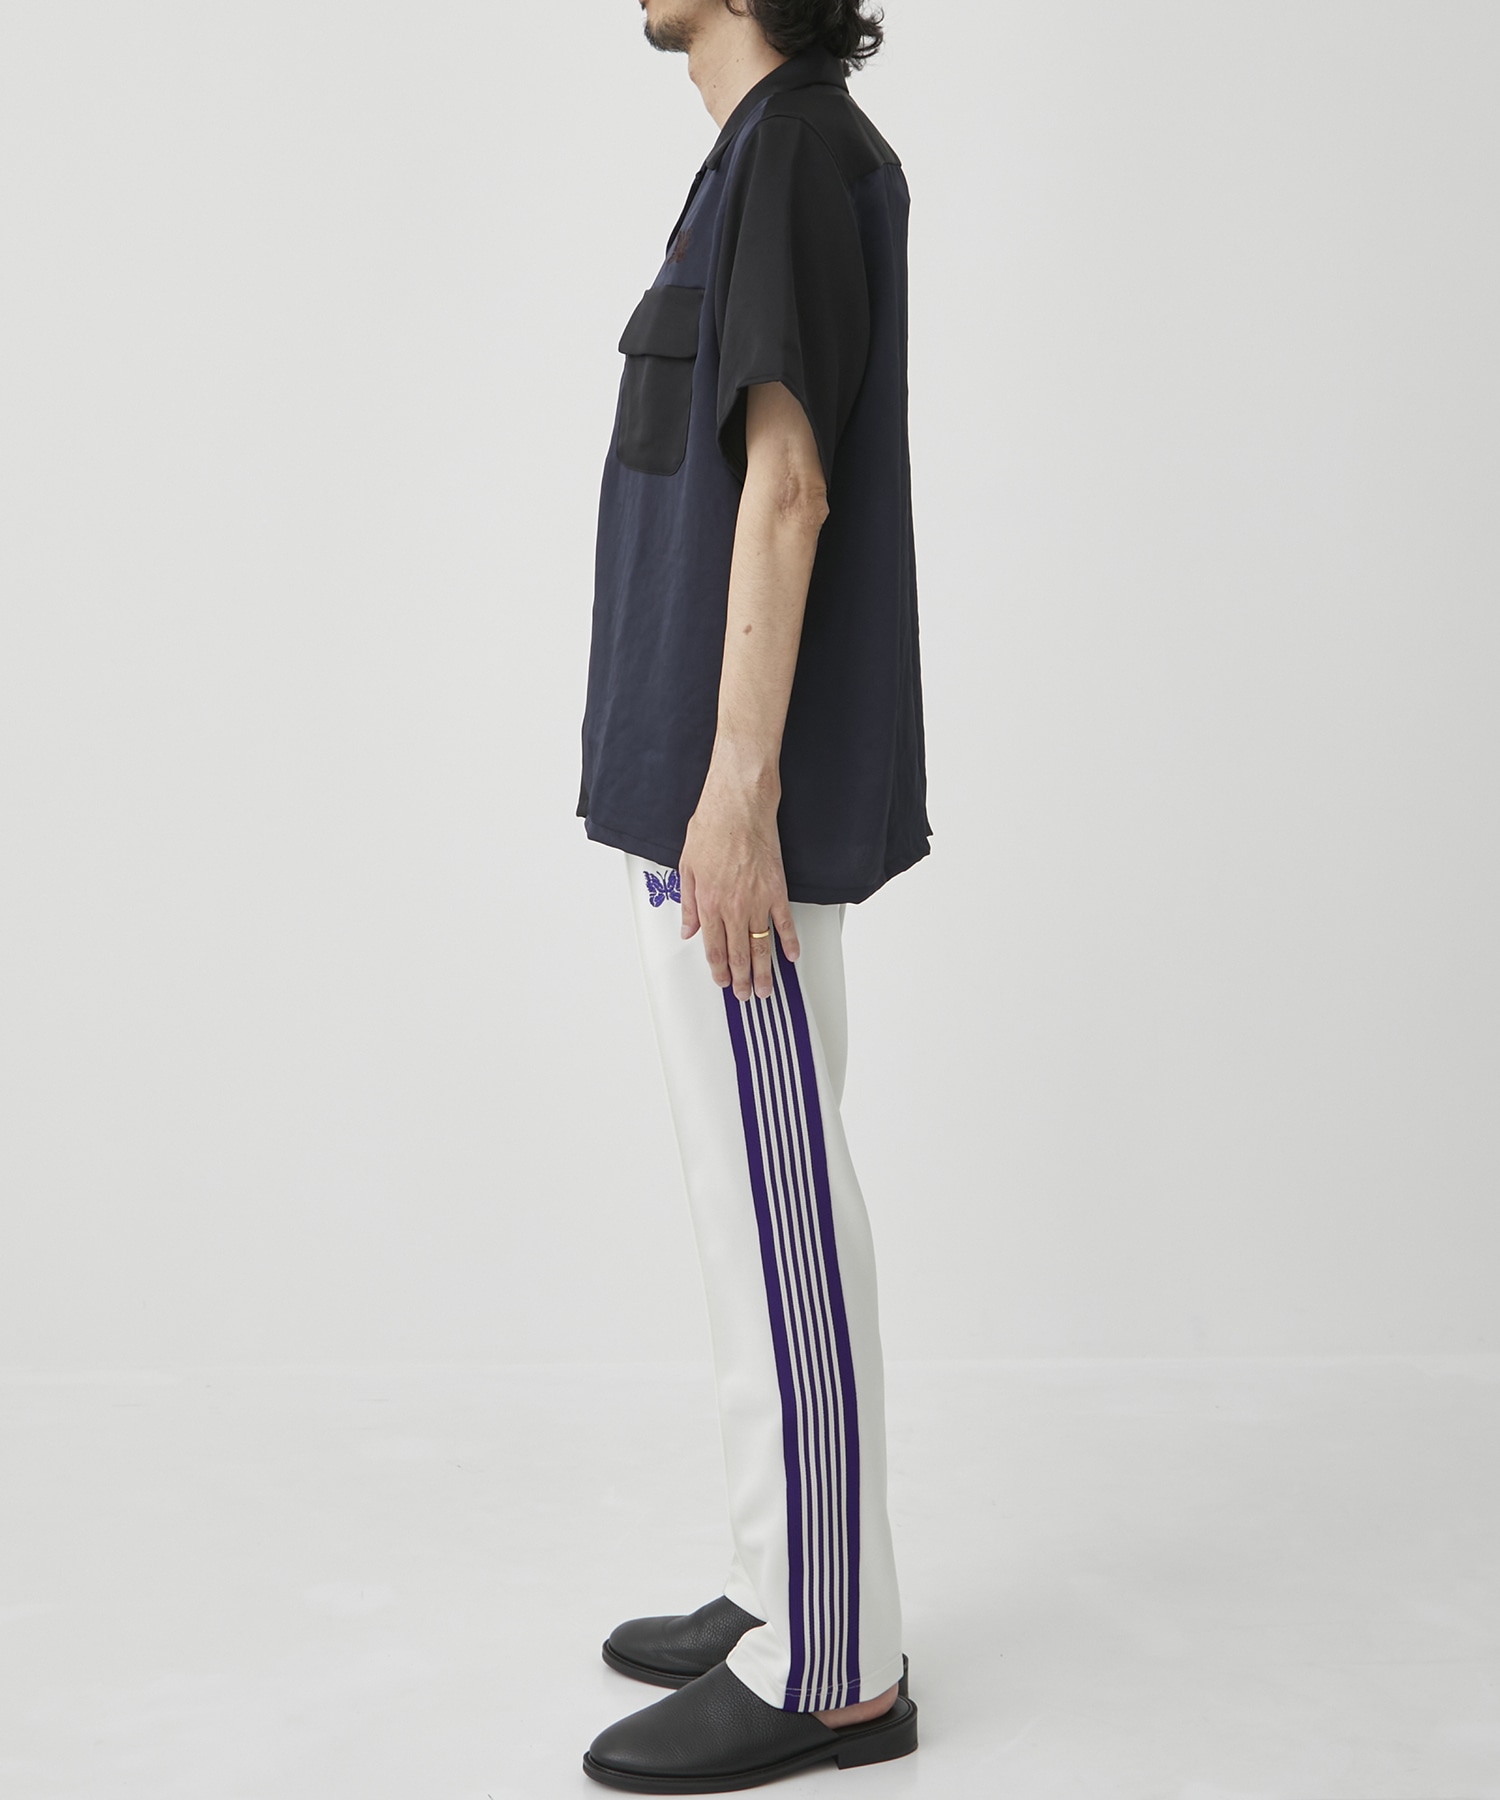 needles TRACK PANT - POLY SMOOTH XS